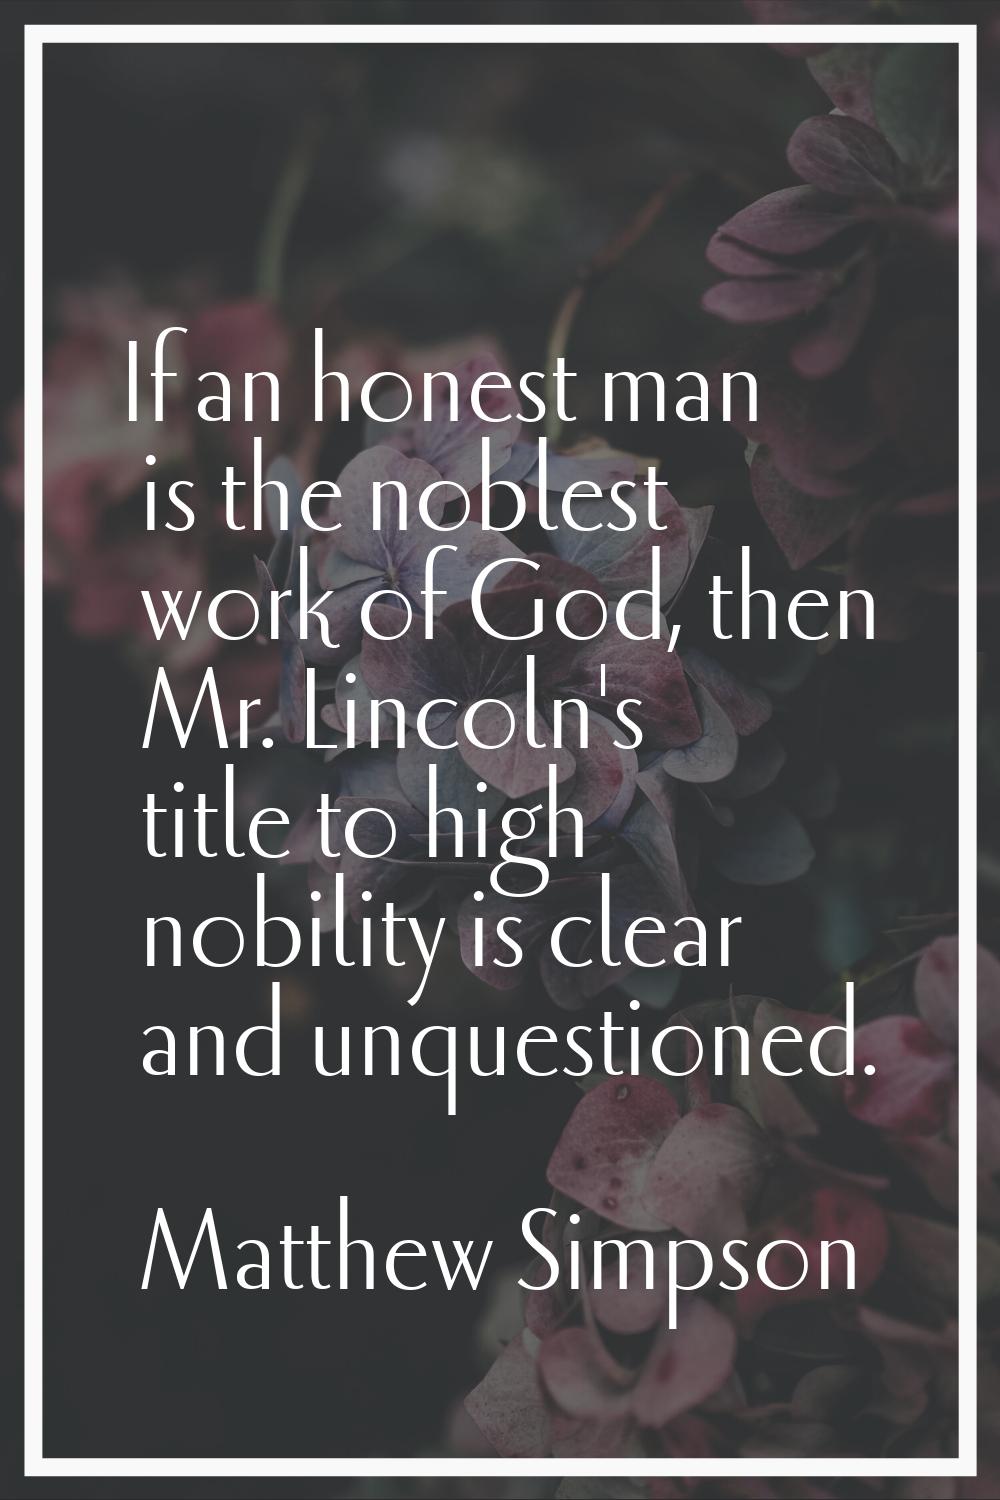 If an honest man is the noblest work of God, then Mr. Lincoln's title to high nobility is clear and